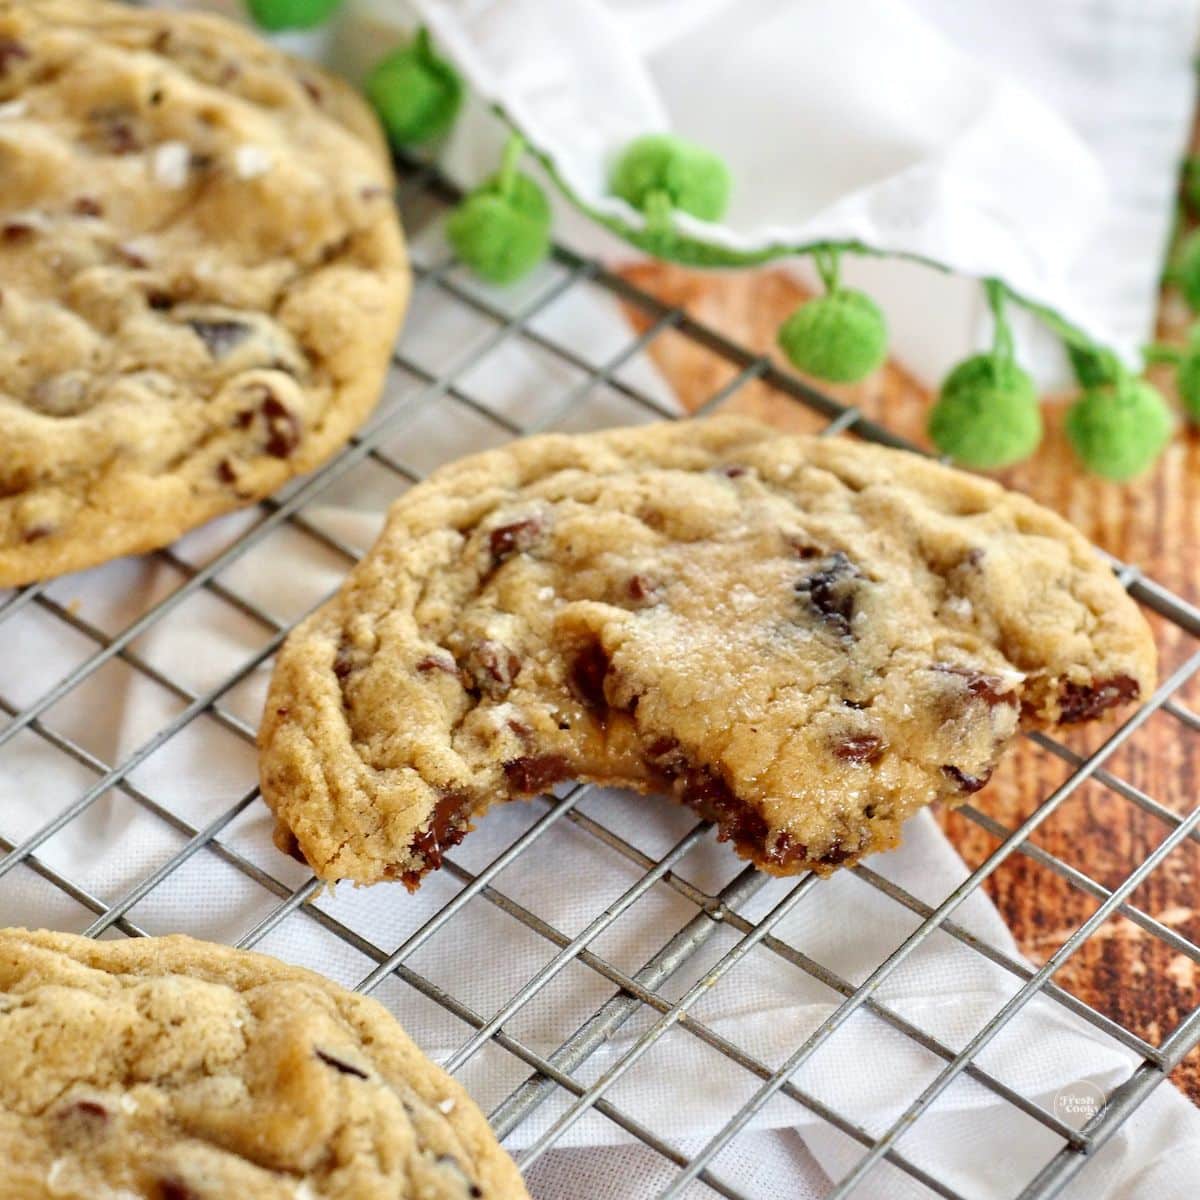 https://www.thefreshcooky.com/wp-content/uploads/2017/03/chewy-chocolate-chip-cookies-square-3.jpg